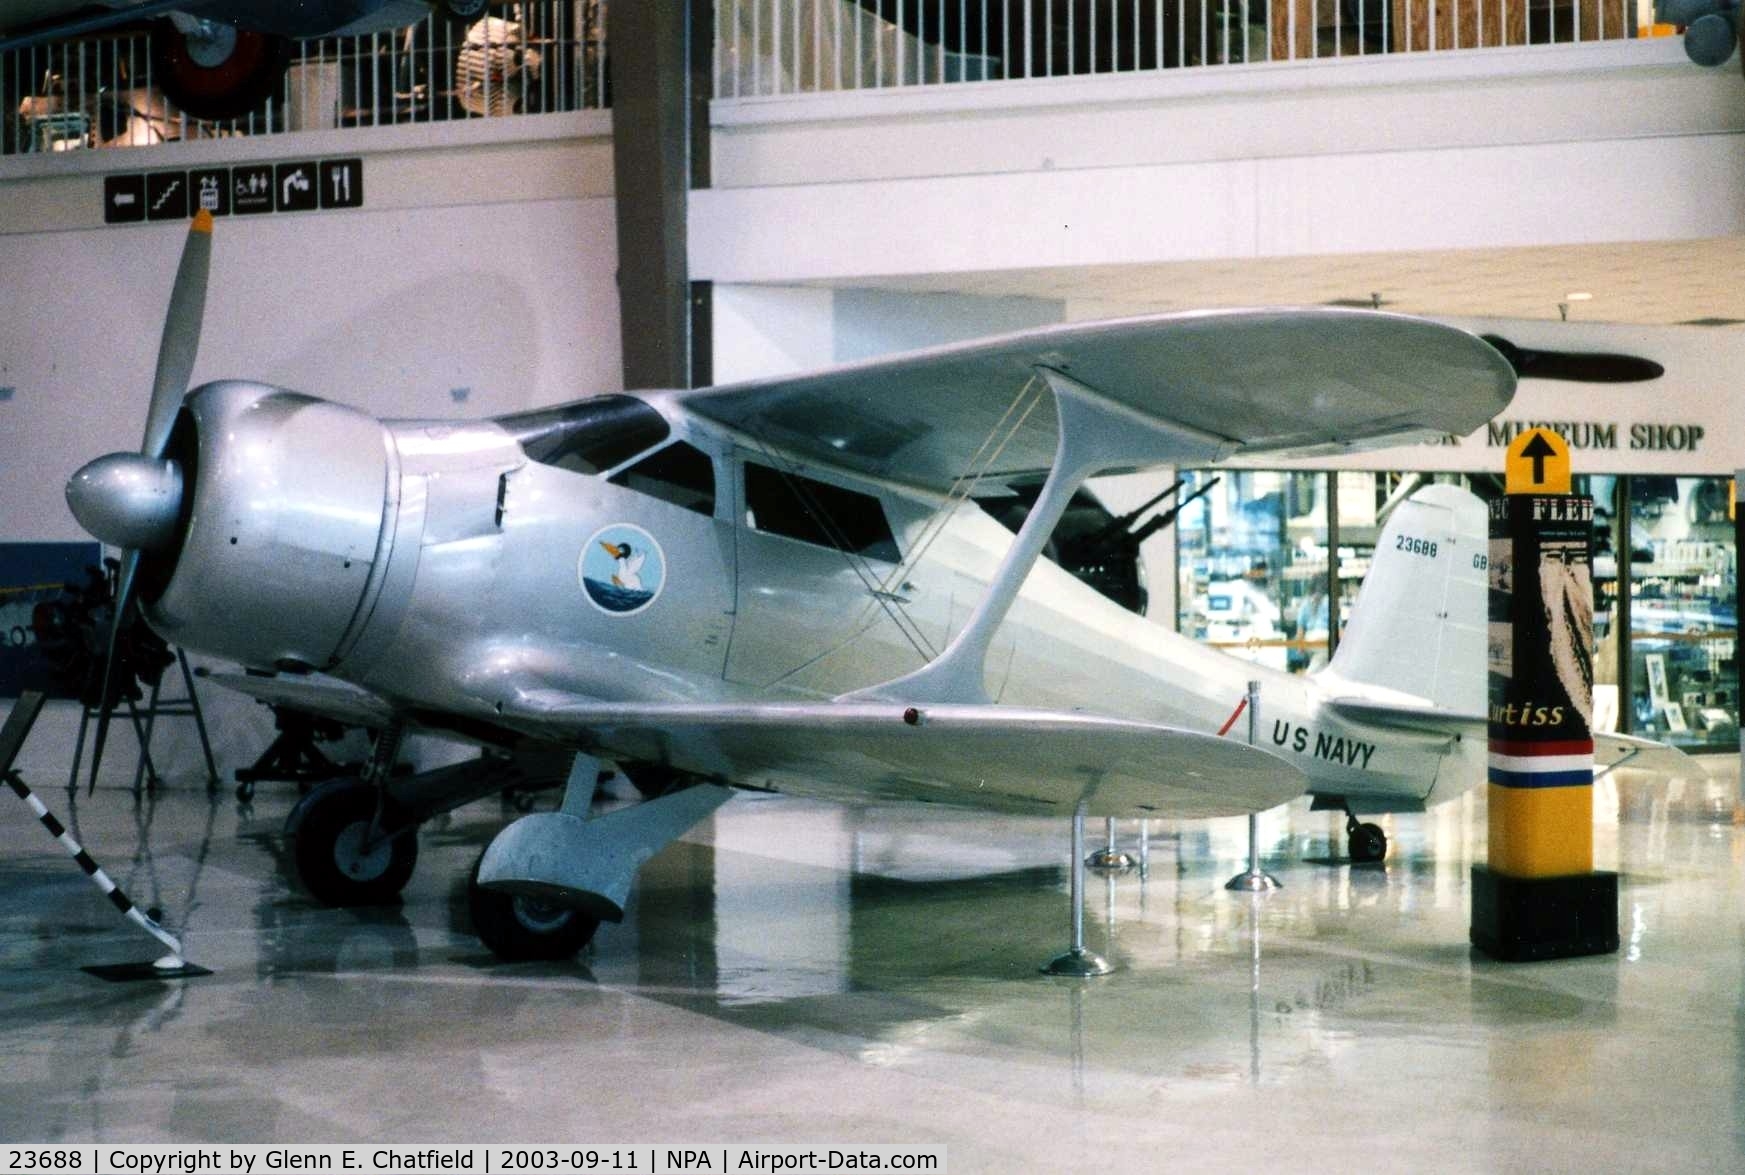 23688, 1944 Beech GB-2 Traveller (D17S) C/N 6700, Ex-UC-43 44-67723 at the National Museum of Naval Aviation